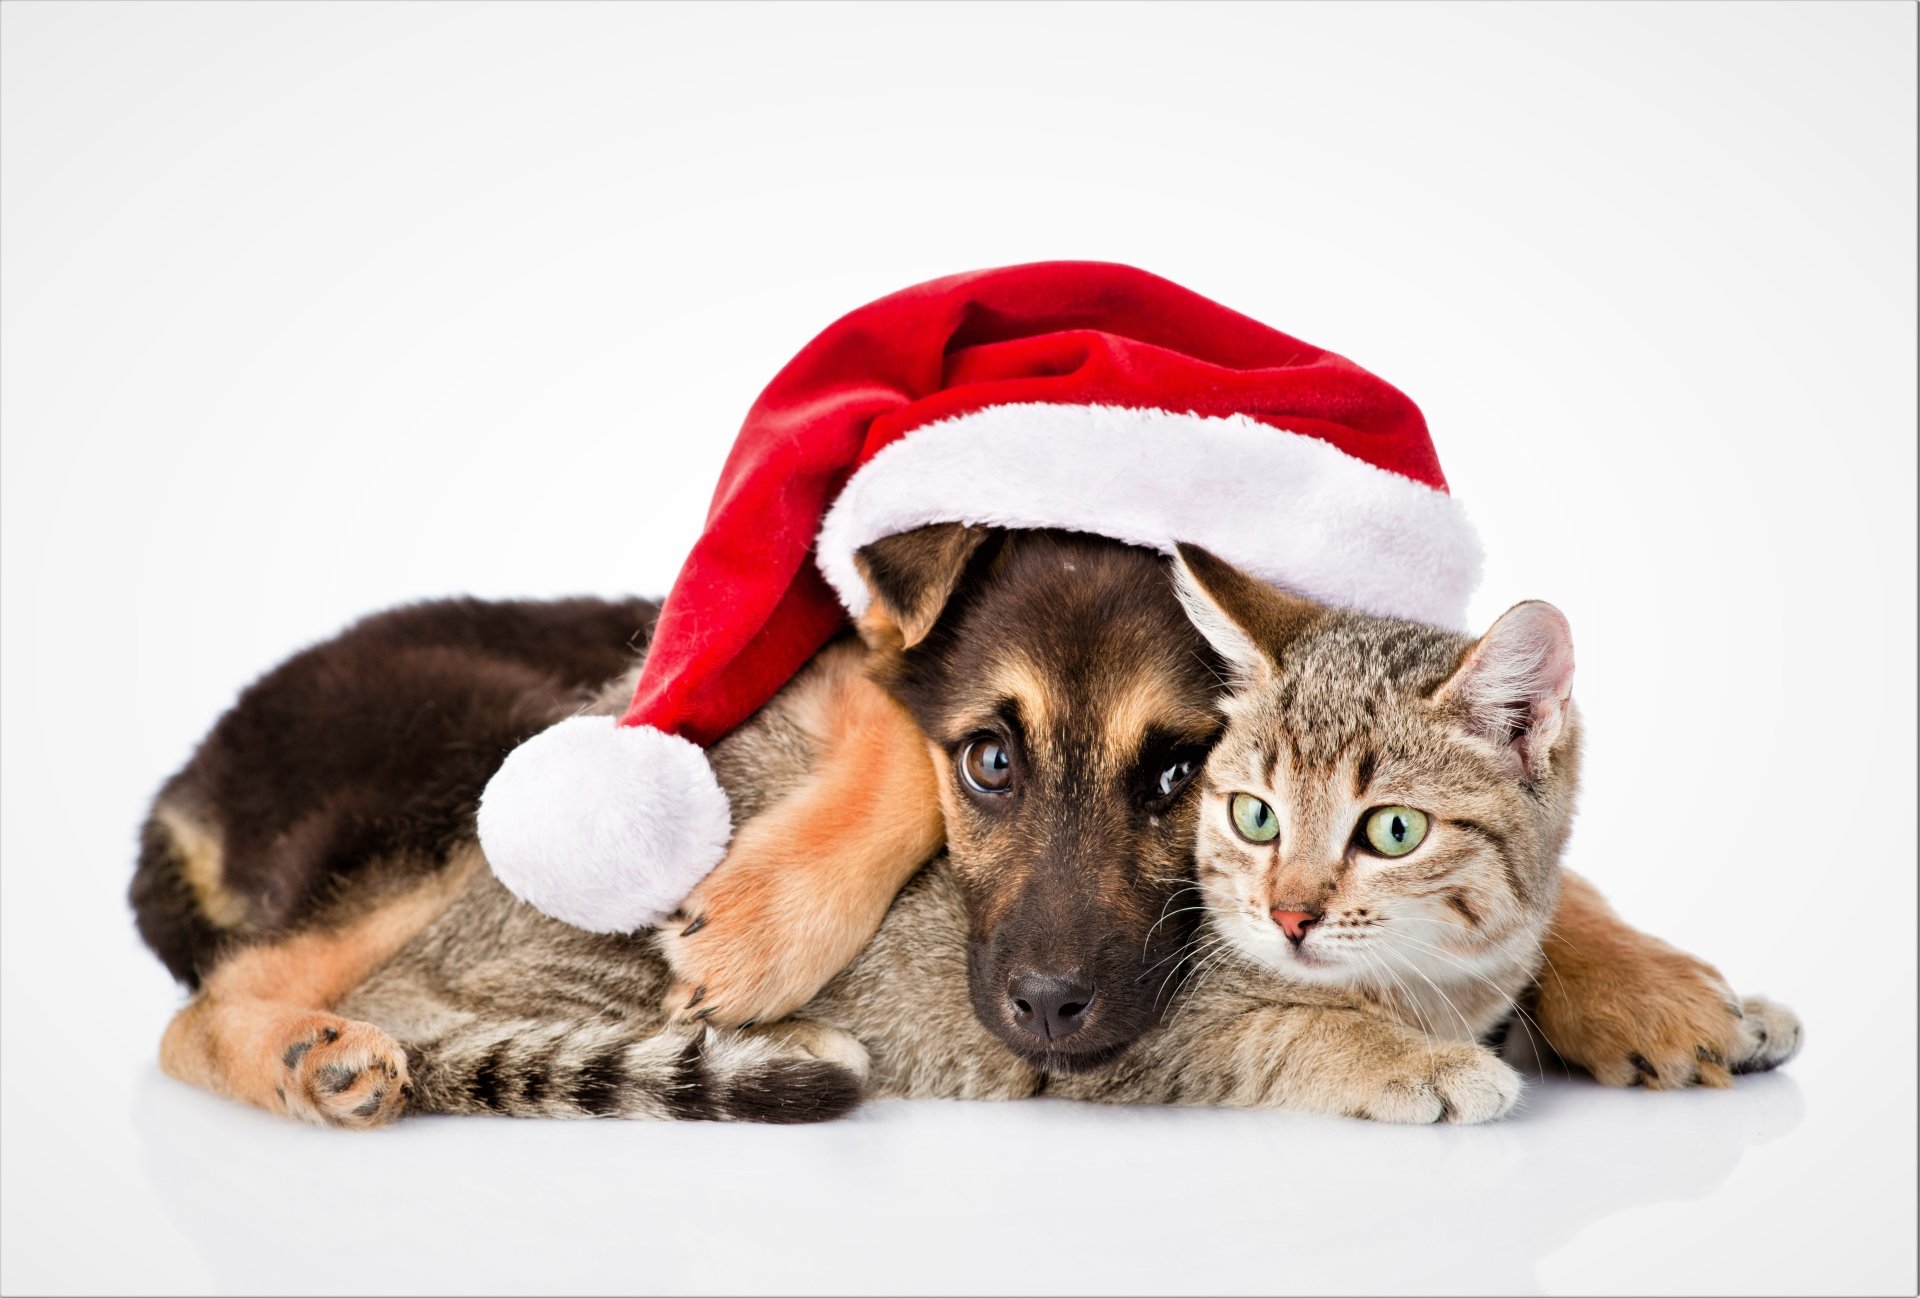 Puppy and Cat at Christmastime